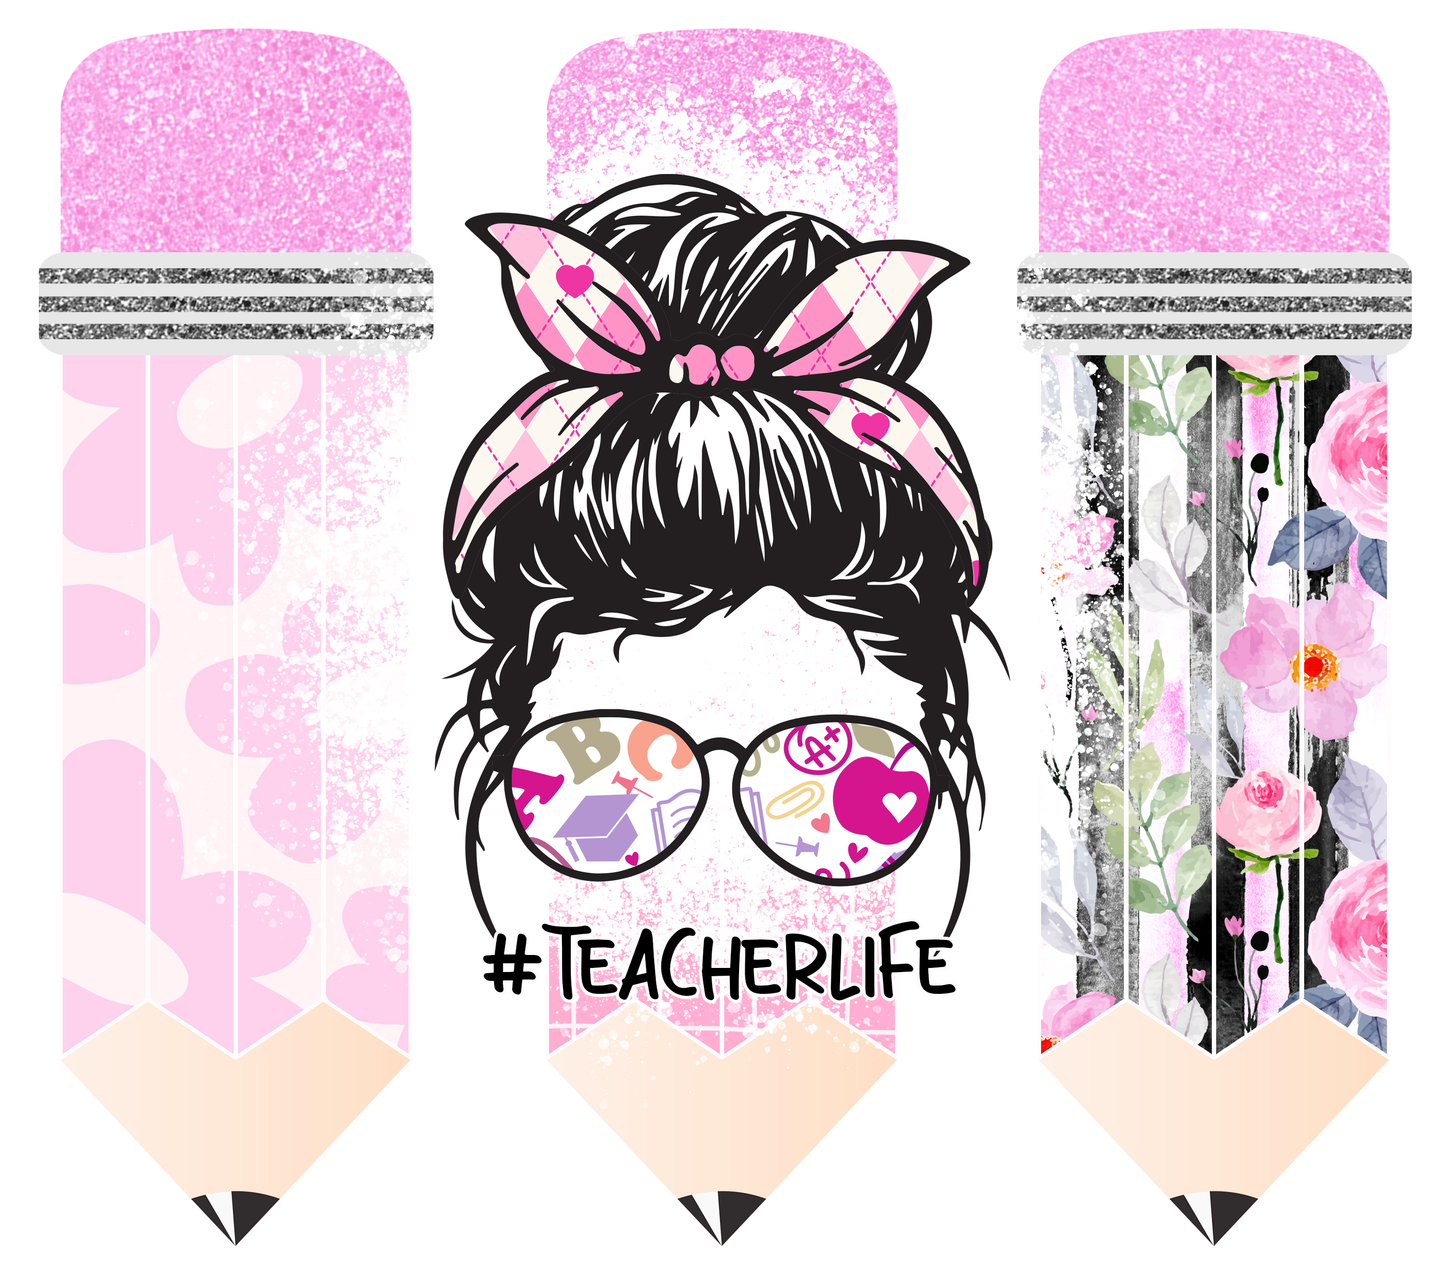 0 oz Stainless Steel Tumbler #Teacherlife That Iconic Gal Wearing Sunglasses With Pink Eraser Top Pencils